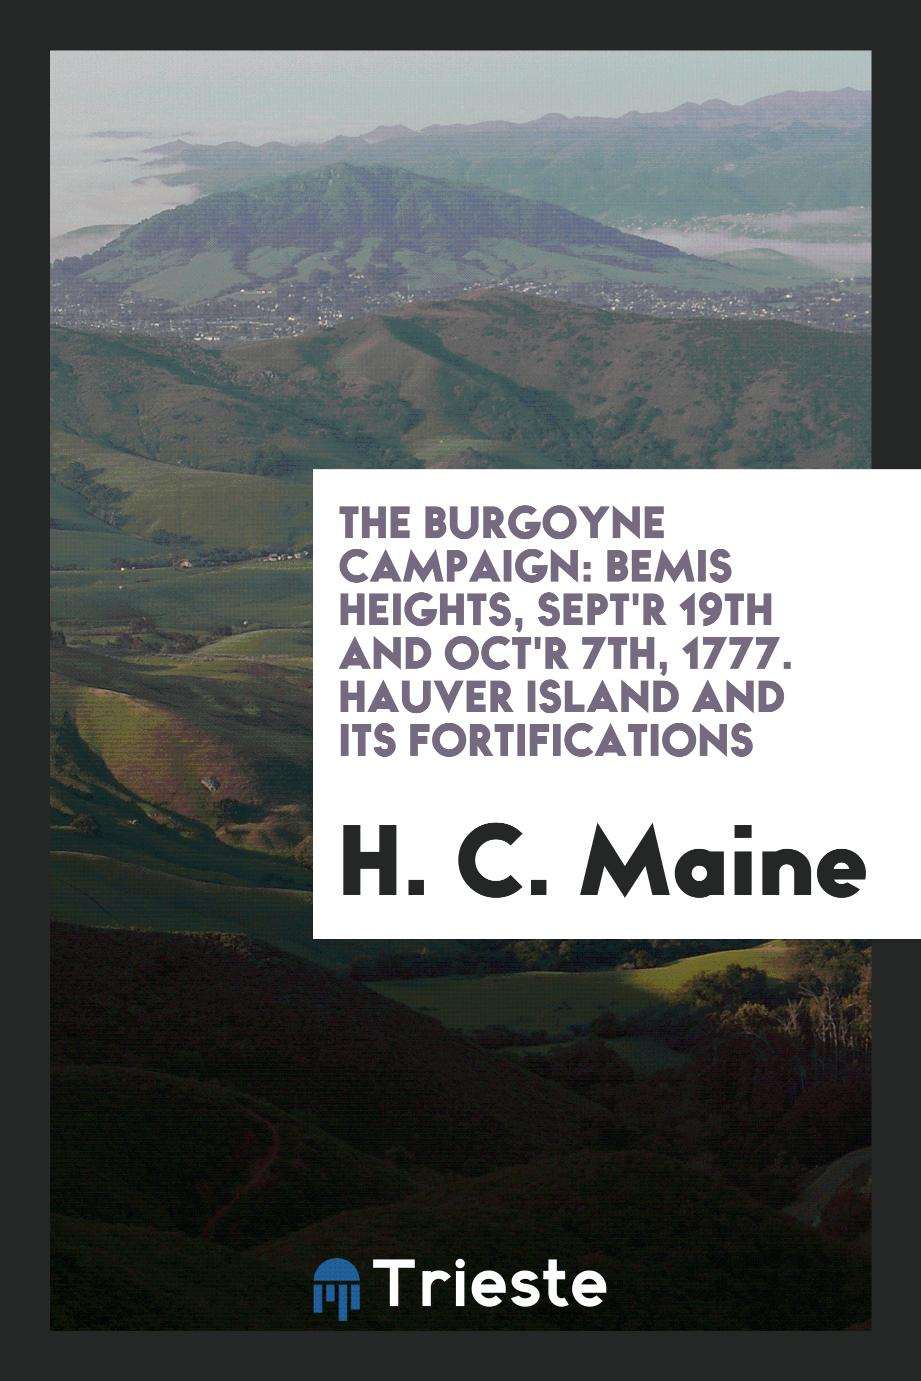 The Burgoyne Campaign: Bemis Heights, Sept'r 19th and Oct'r 7th, 1777. Hauver Island and Its Fortifications